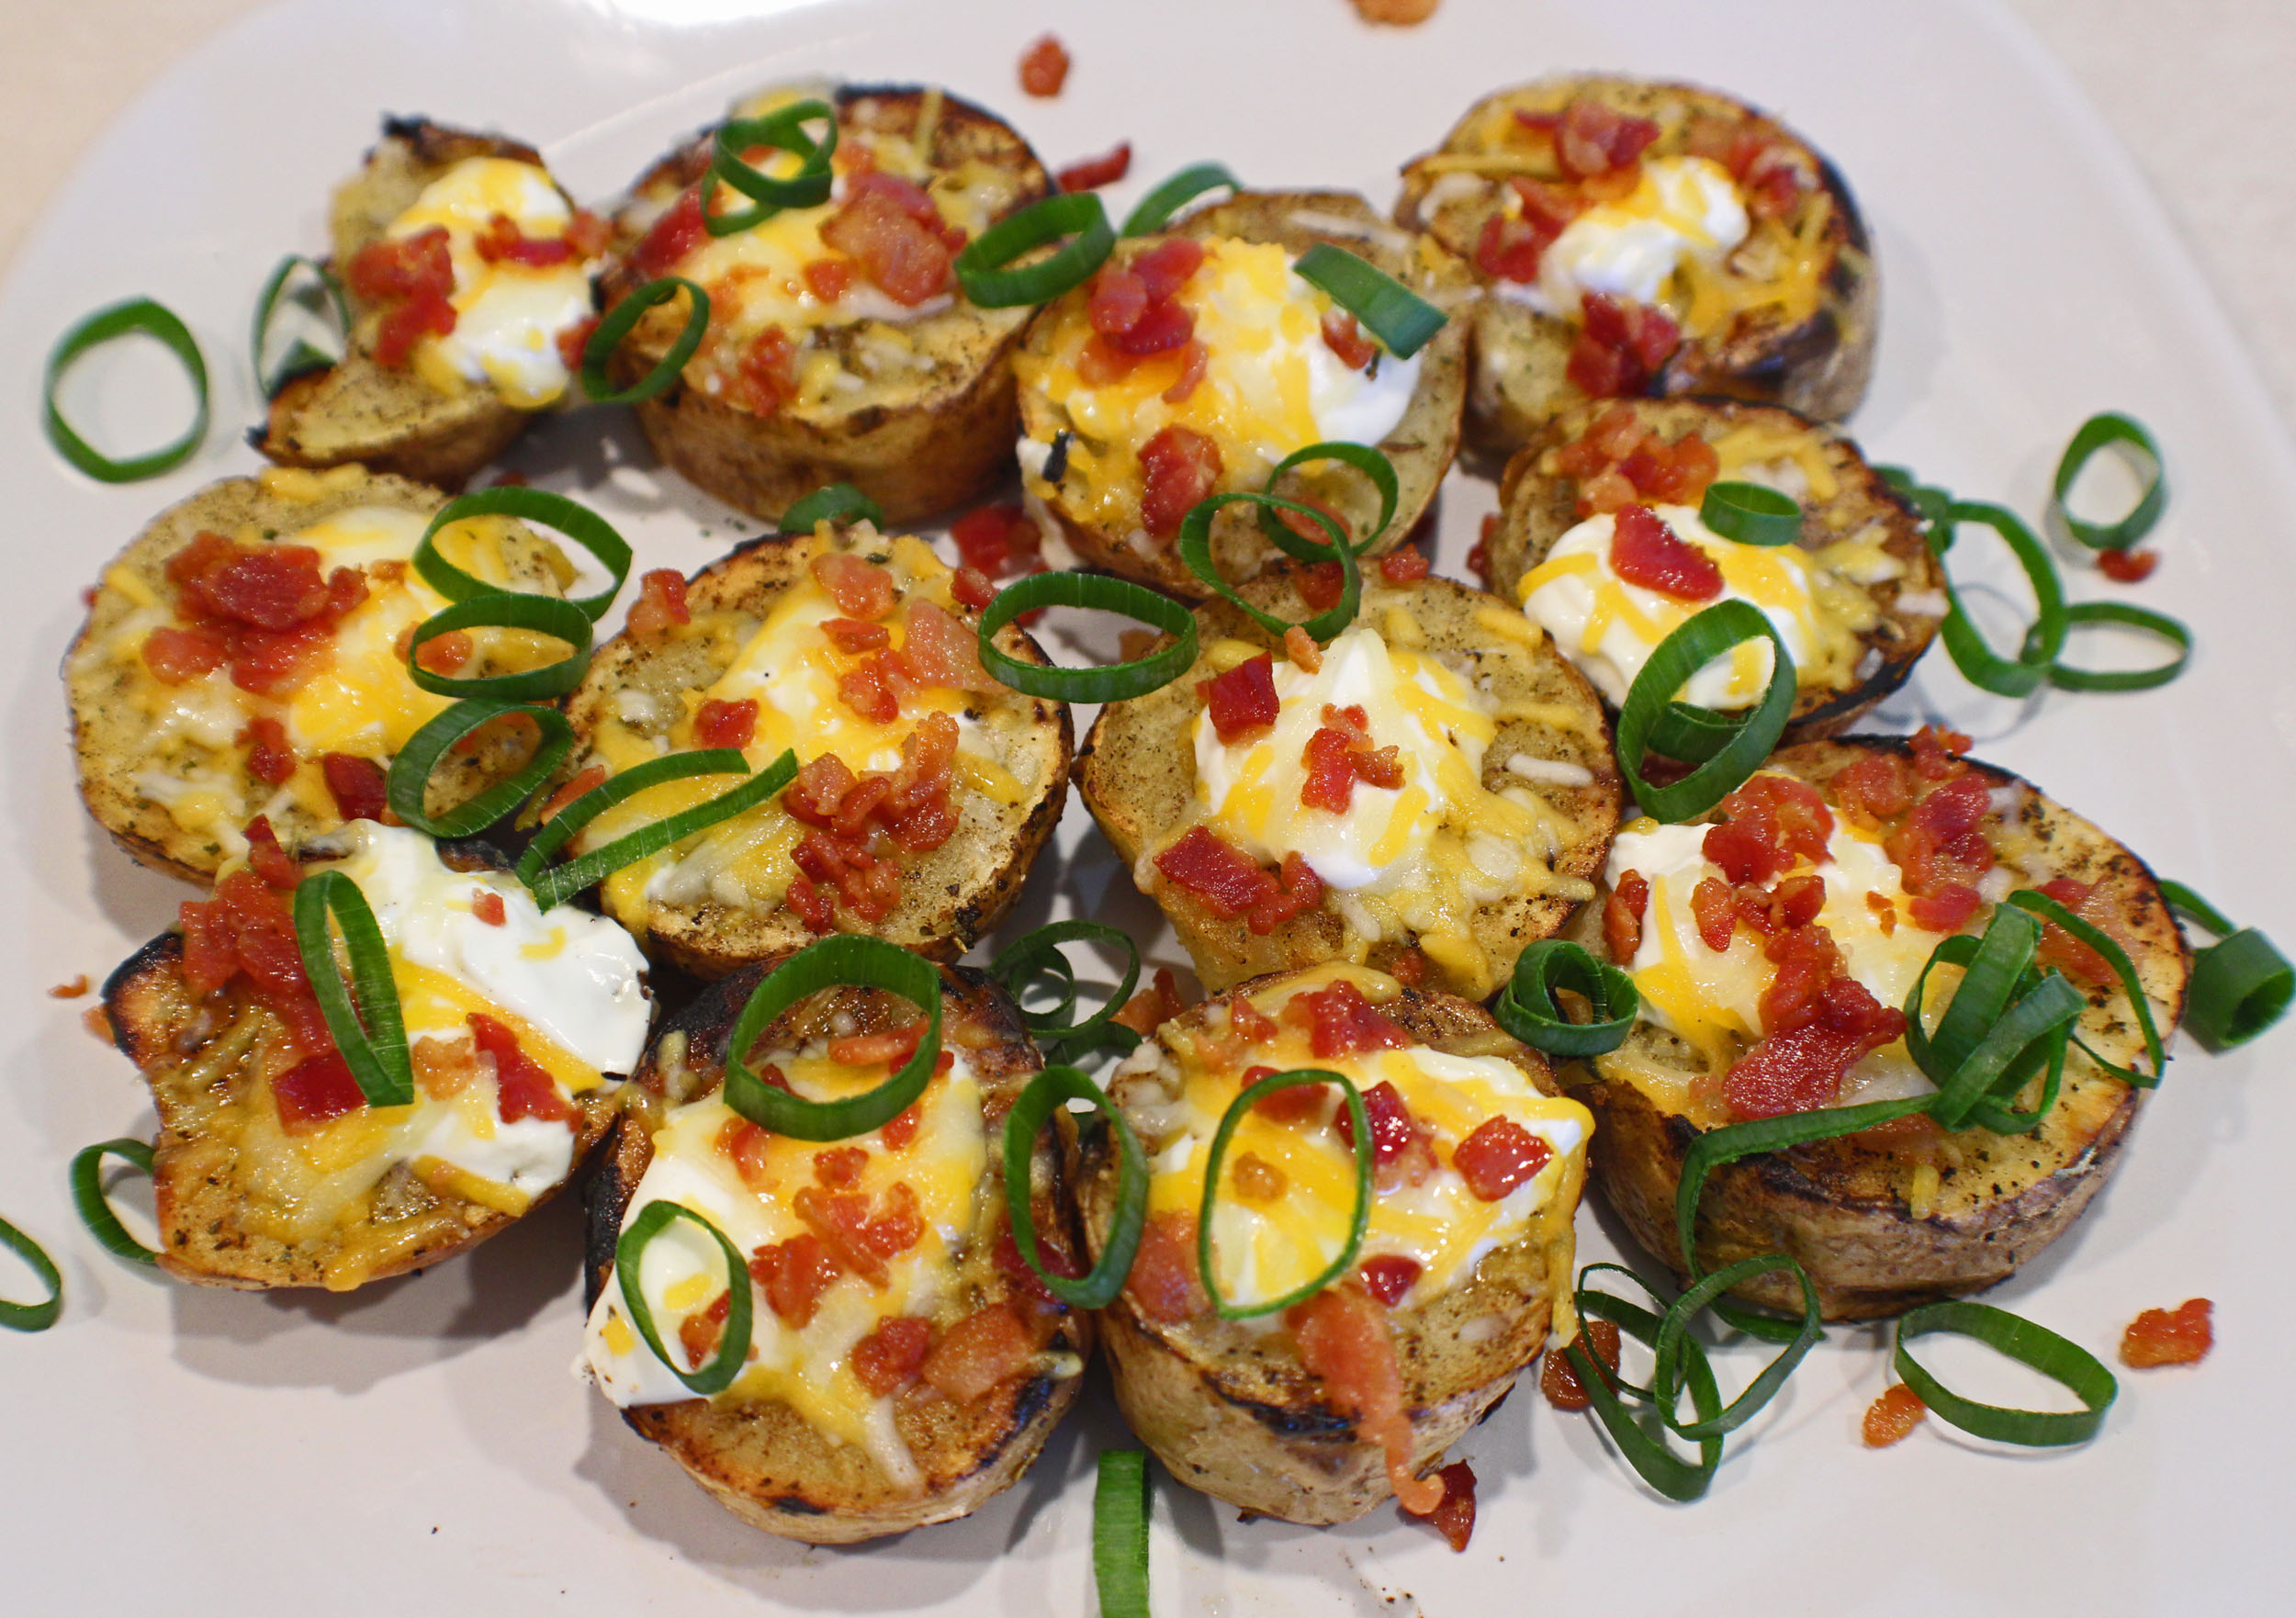 Grilled Loaded Potatoes